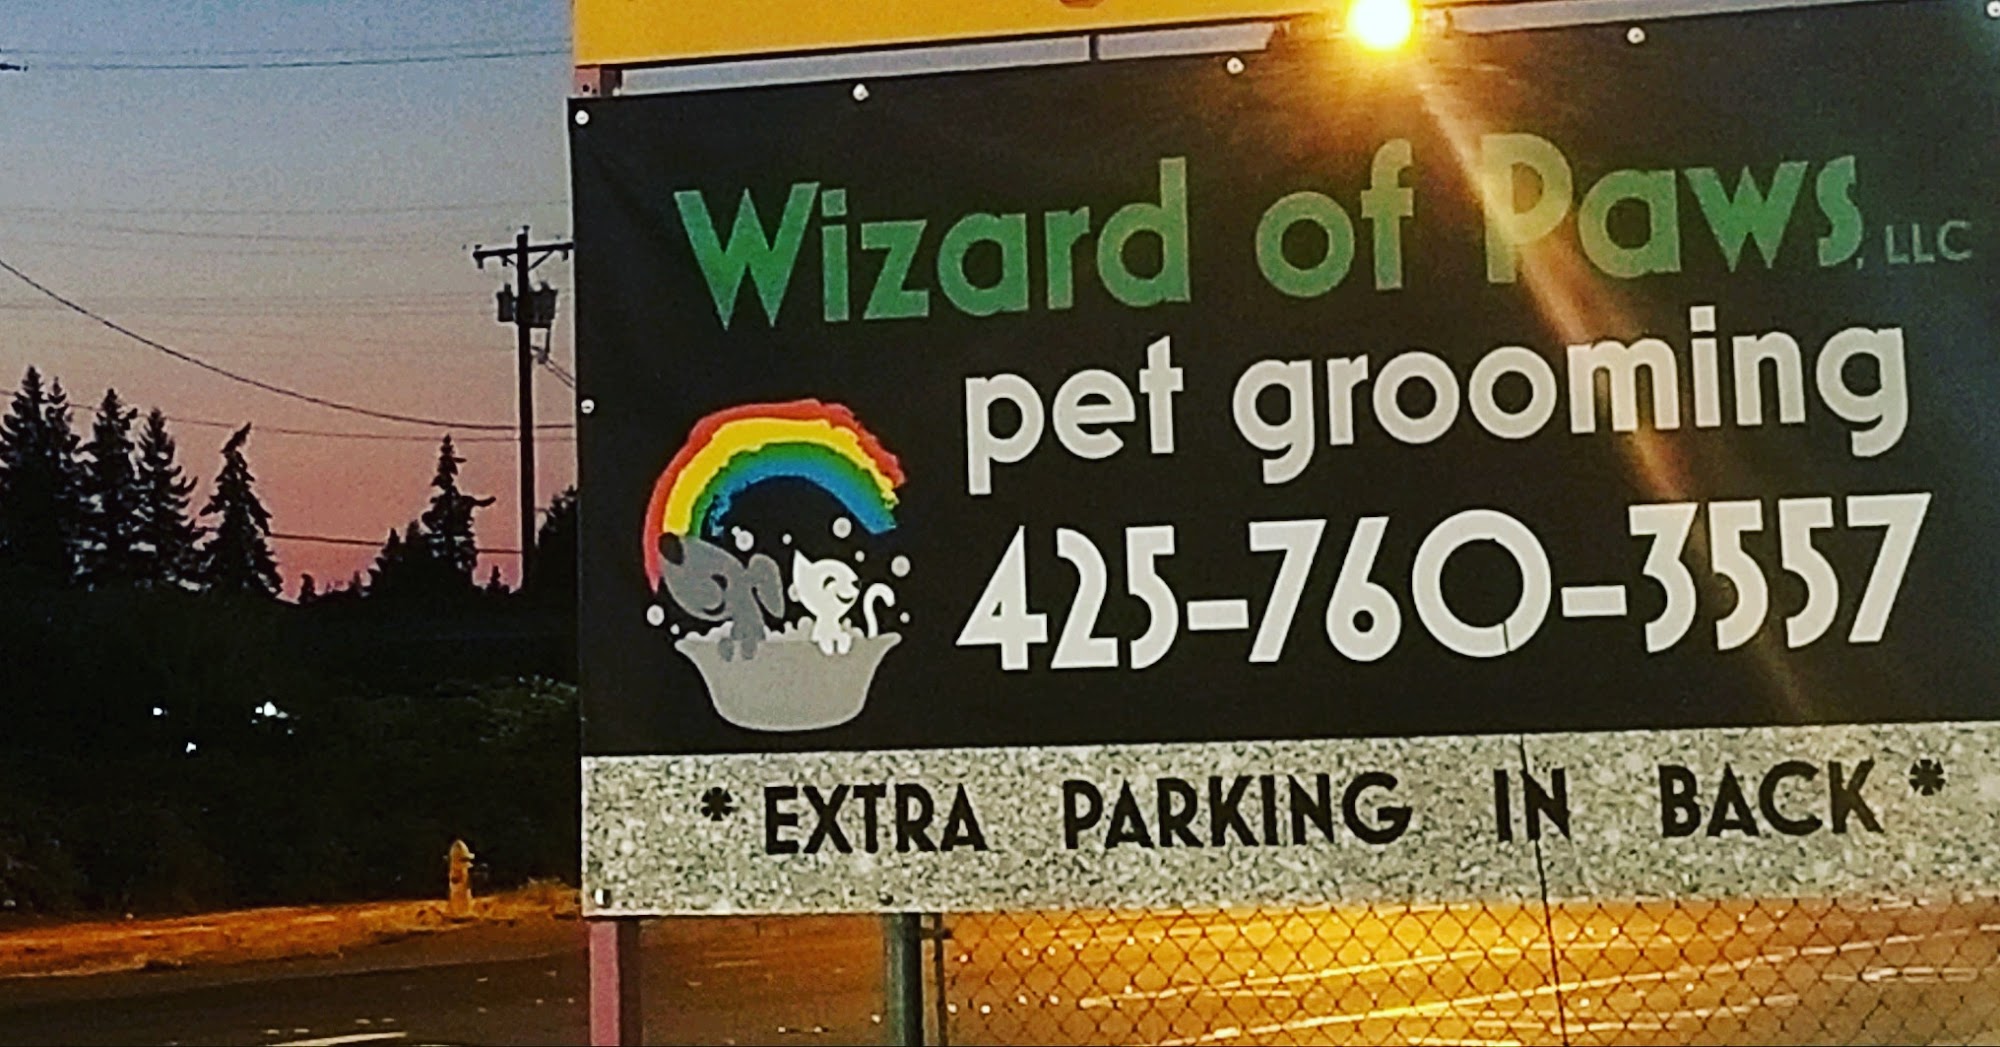 Wizard of Paws, LLC